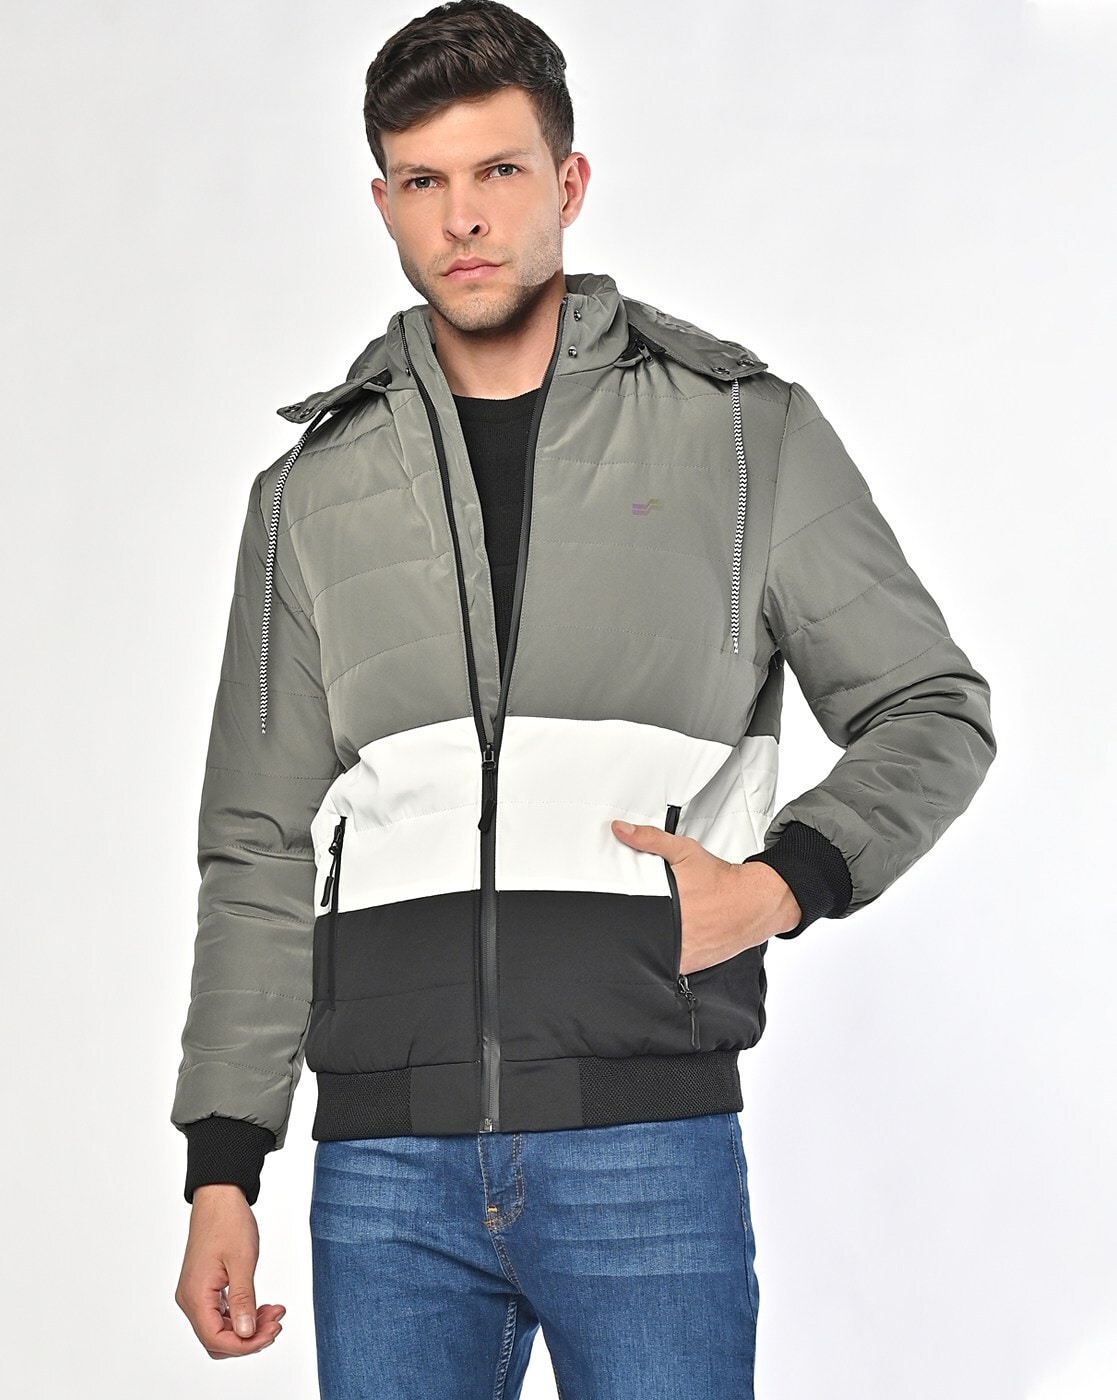 Men's Hooded Coats | Explore our New Arrivals | ZARA United States